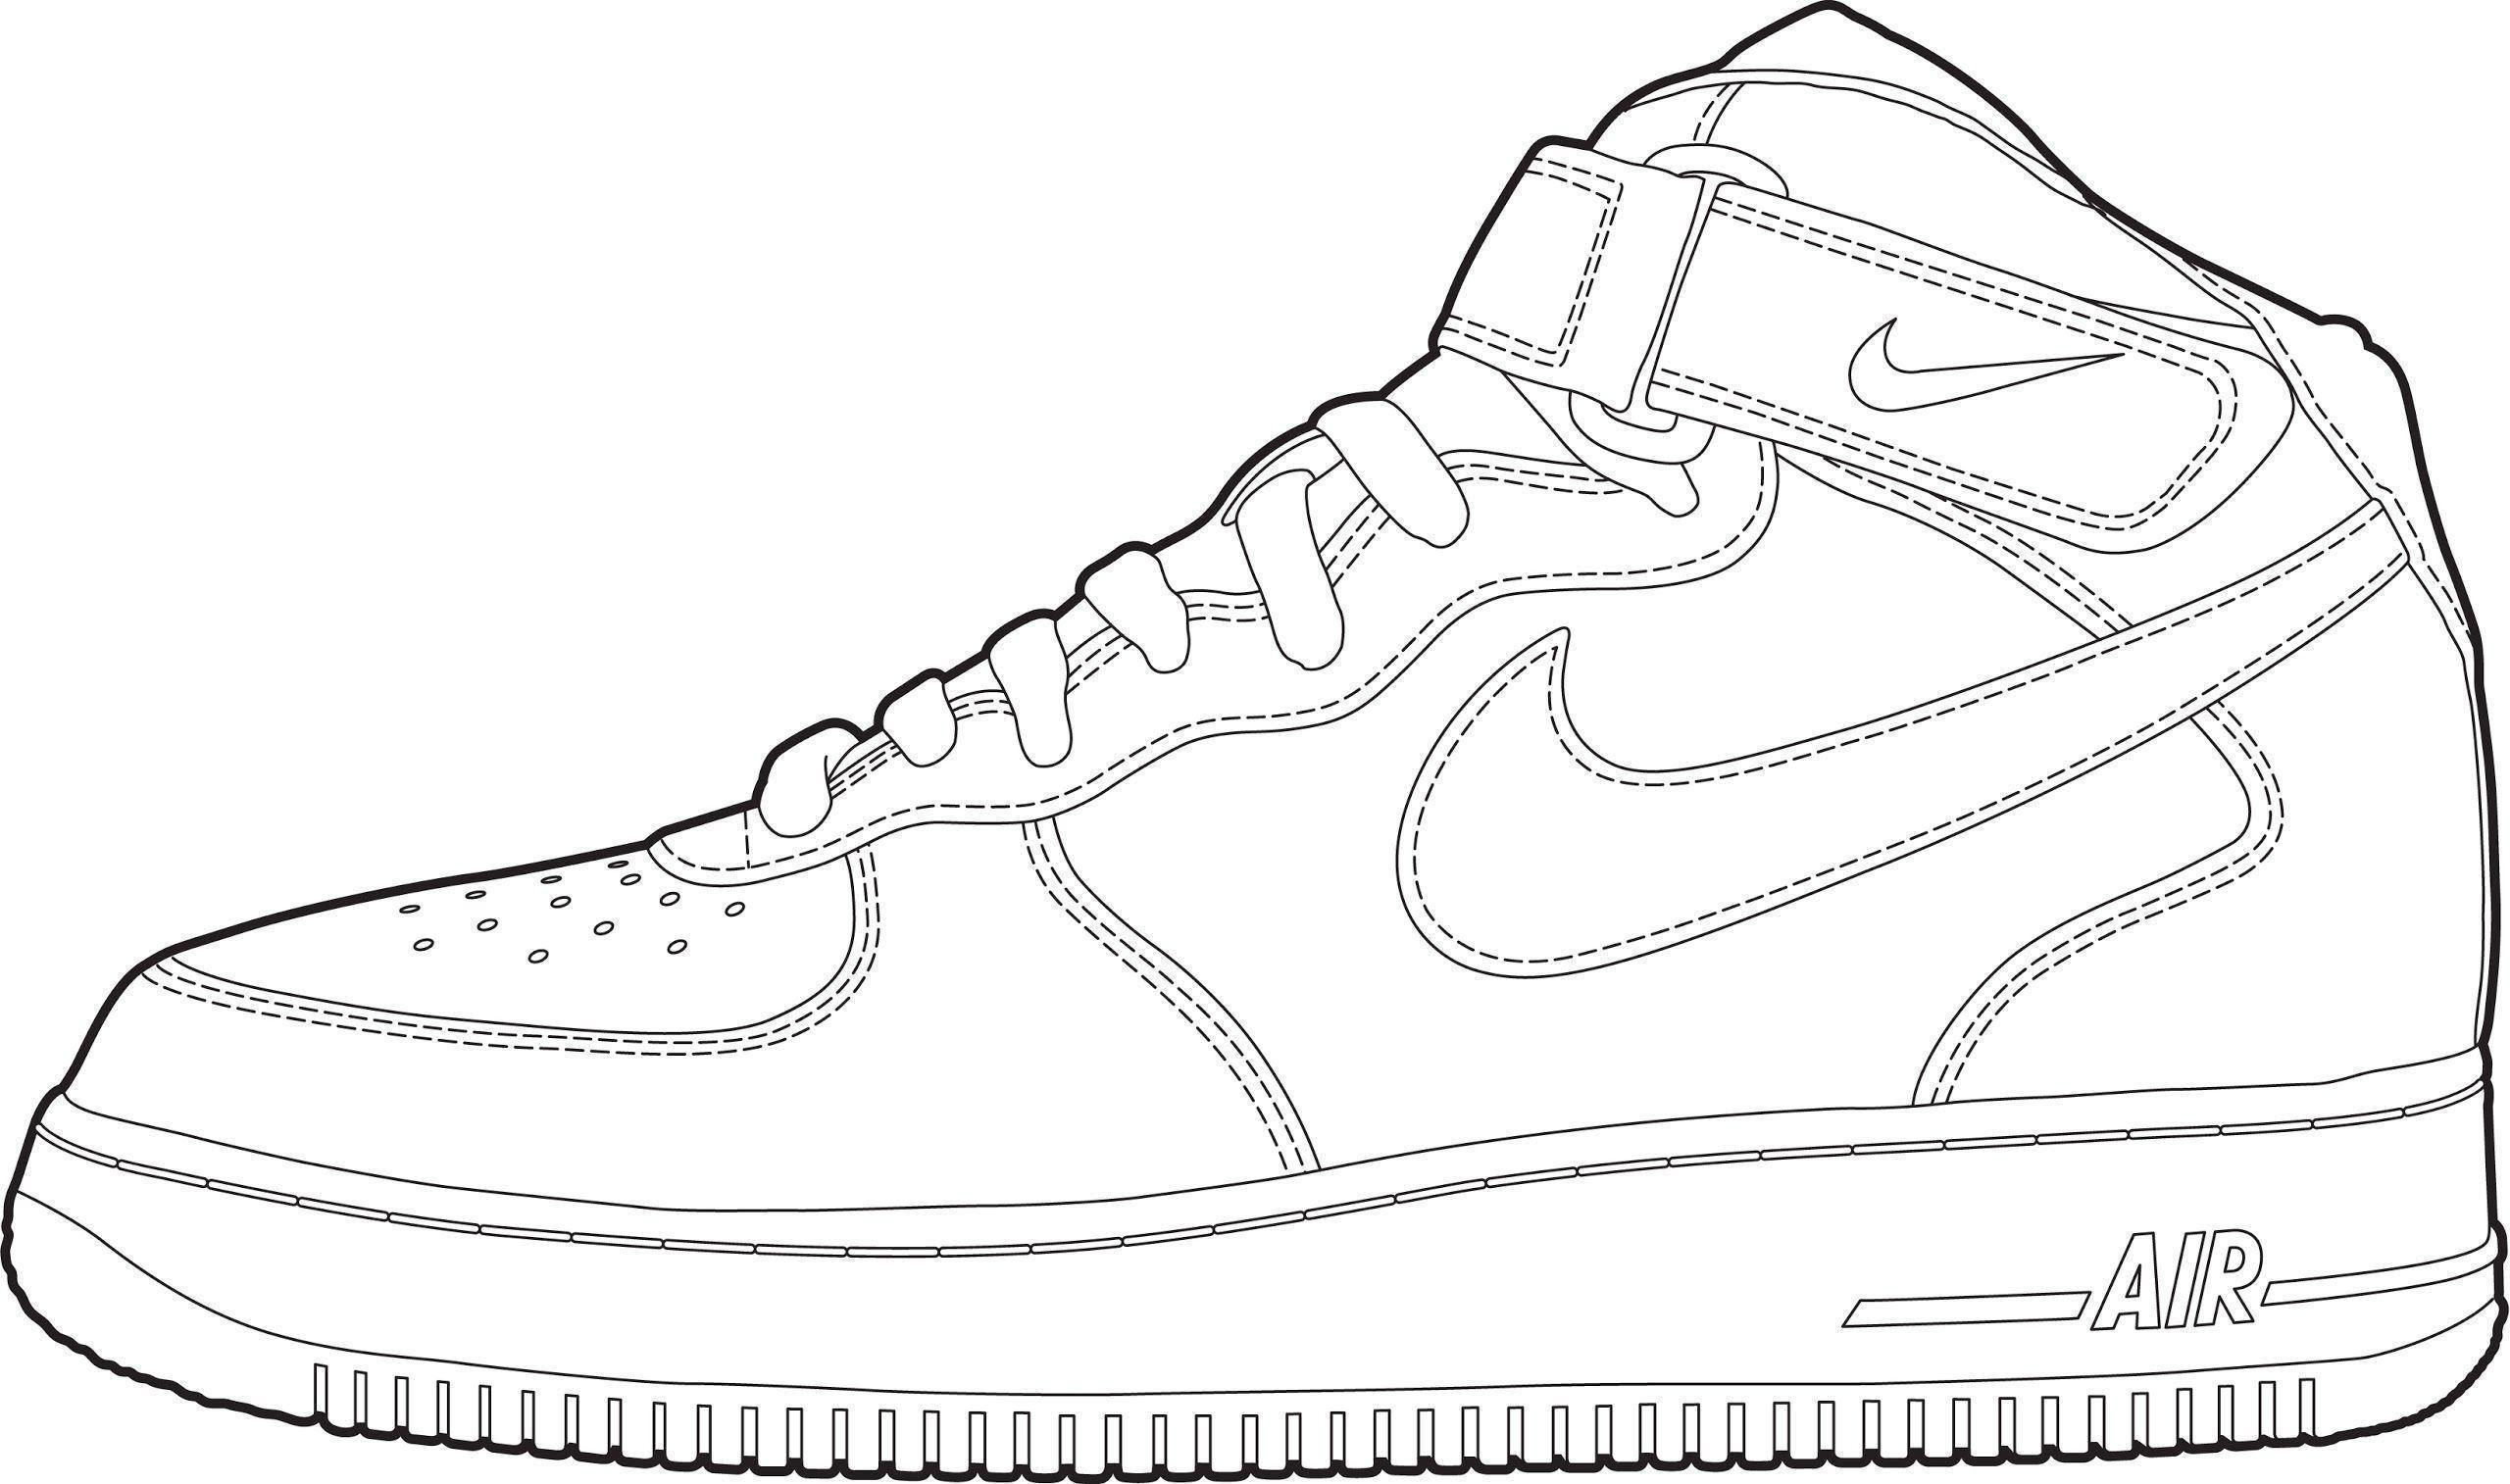 Off White Air Force 1 Wallpapers - Wallpaper Cave